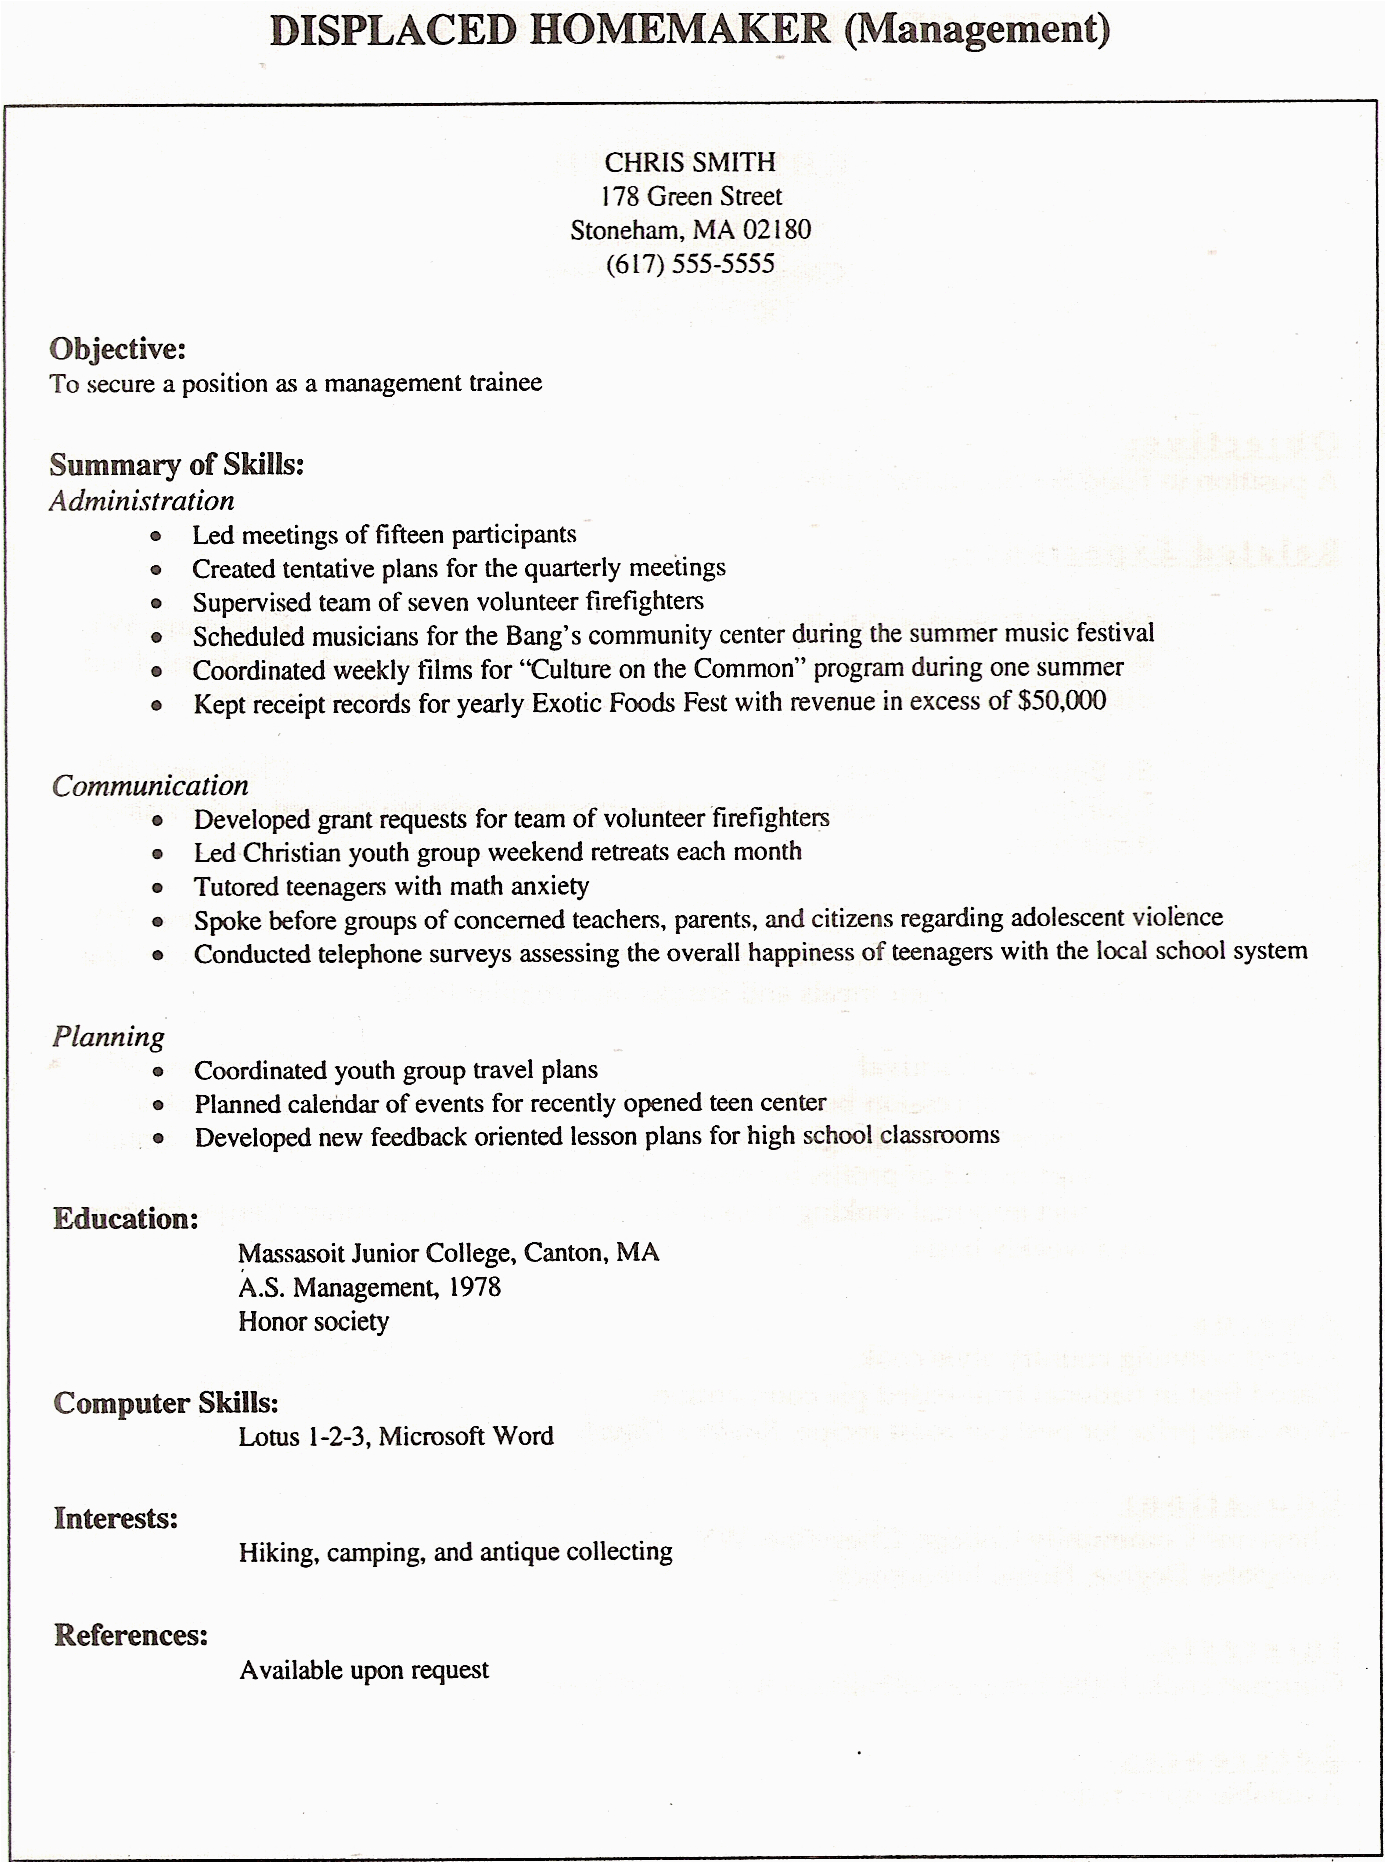 Sample Resume for Housewife Returning to Work Resume Housewife Returning Work